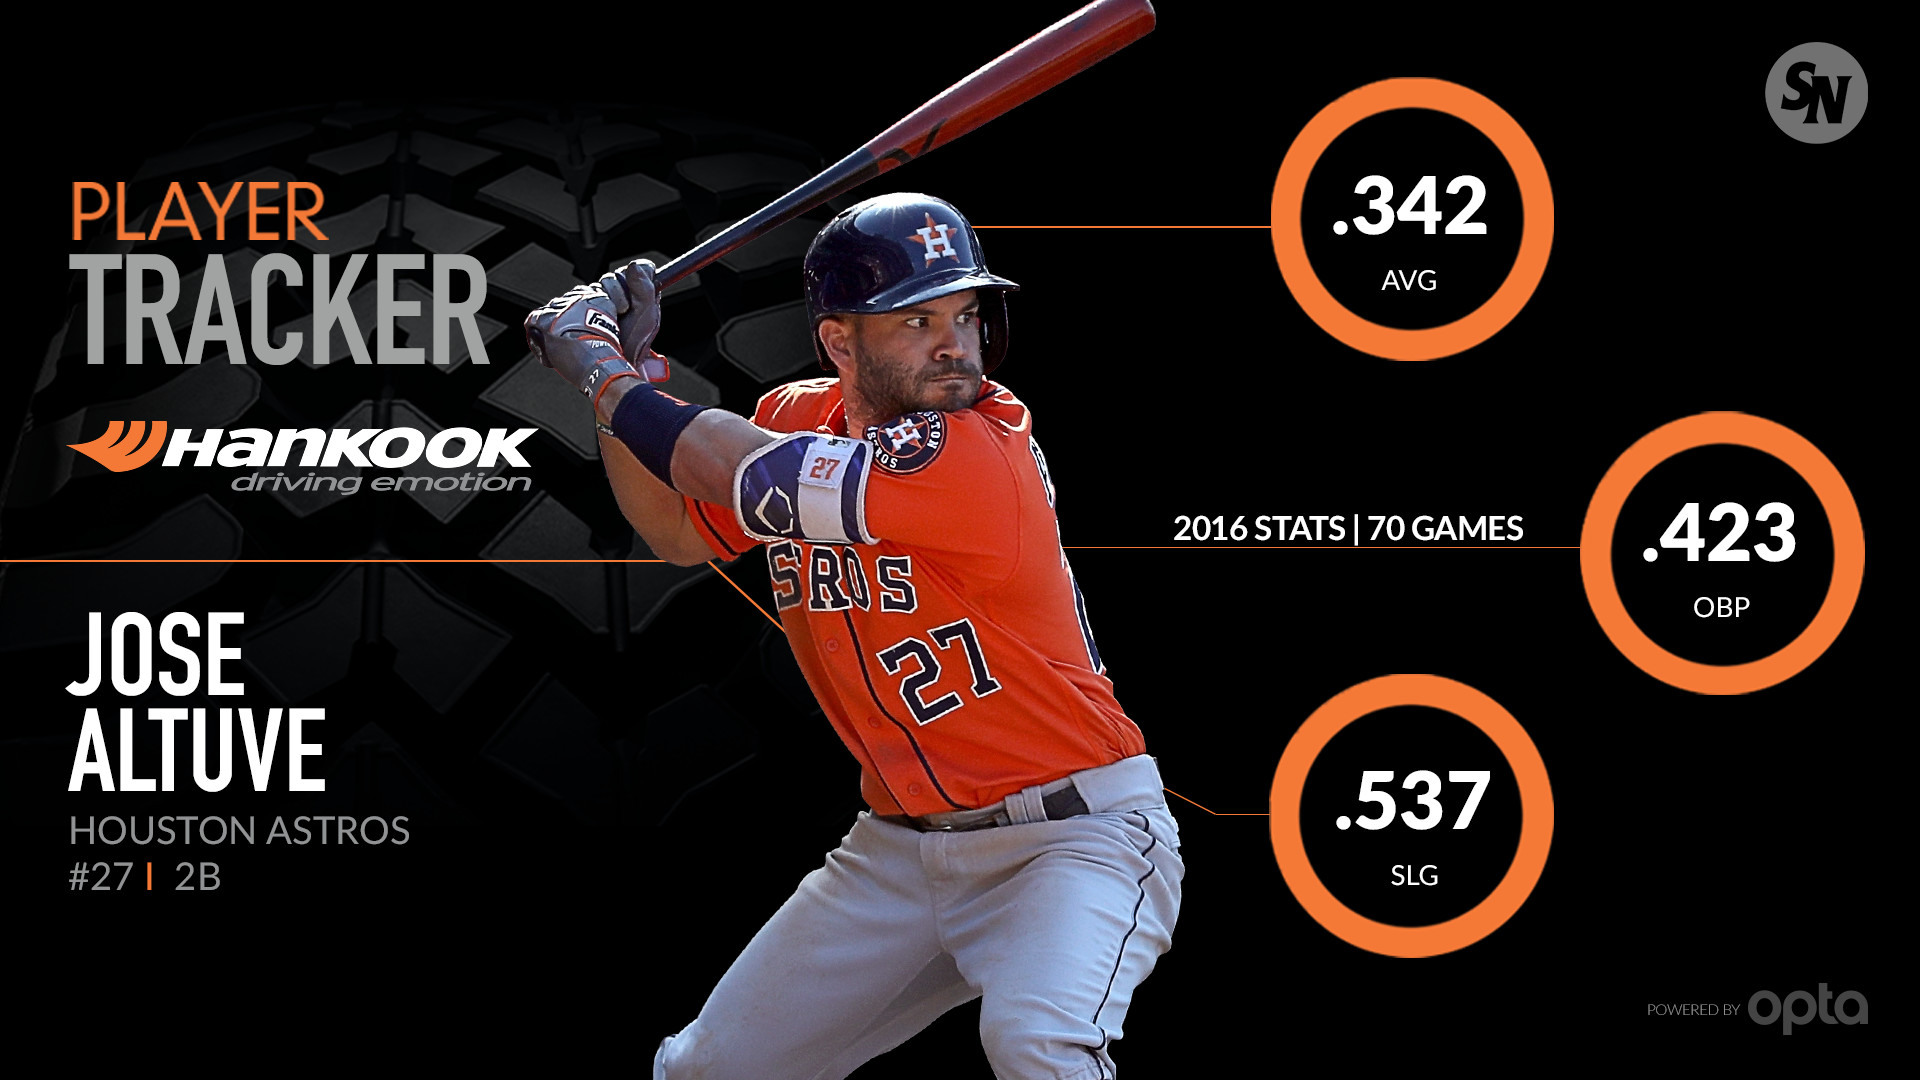 1920x1080 MORE: Top 10 Astros players of all time. “